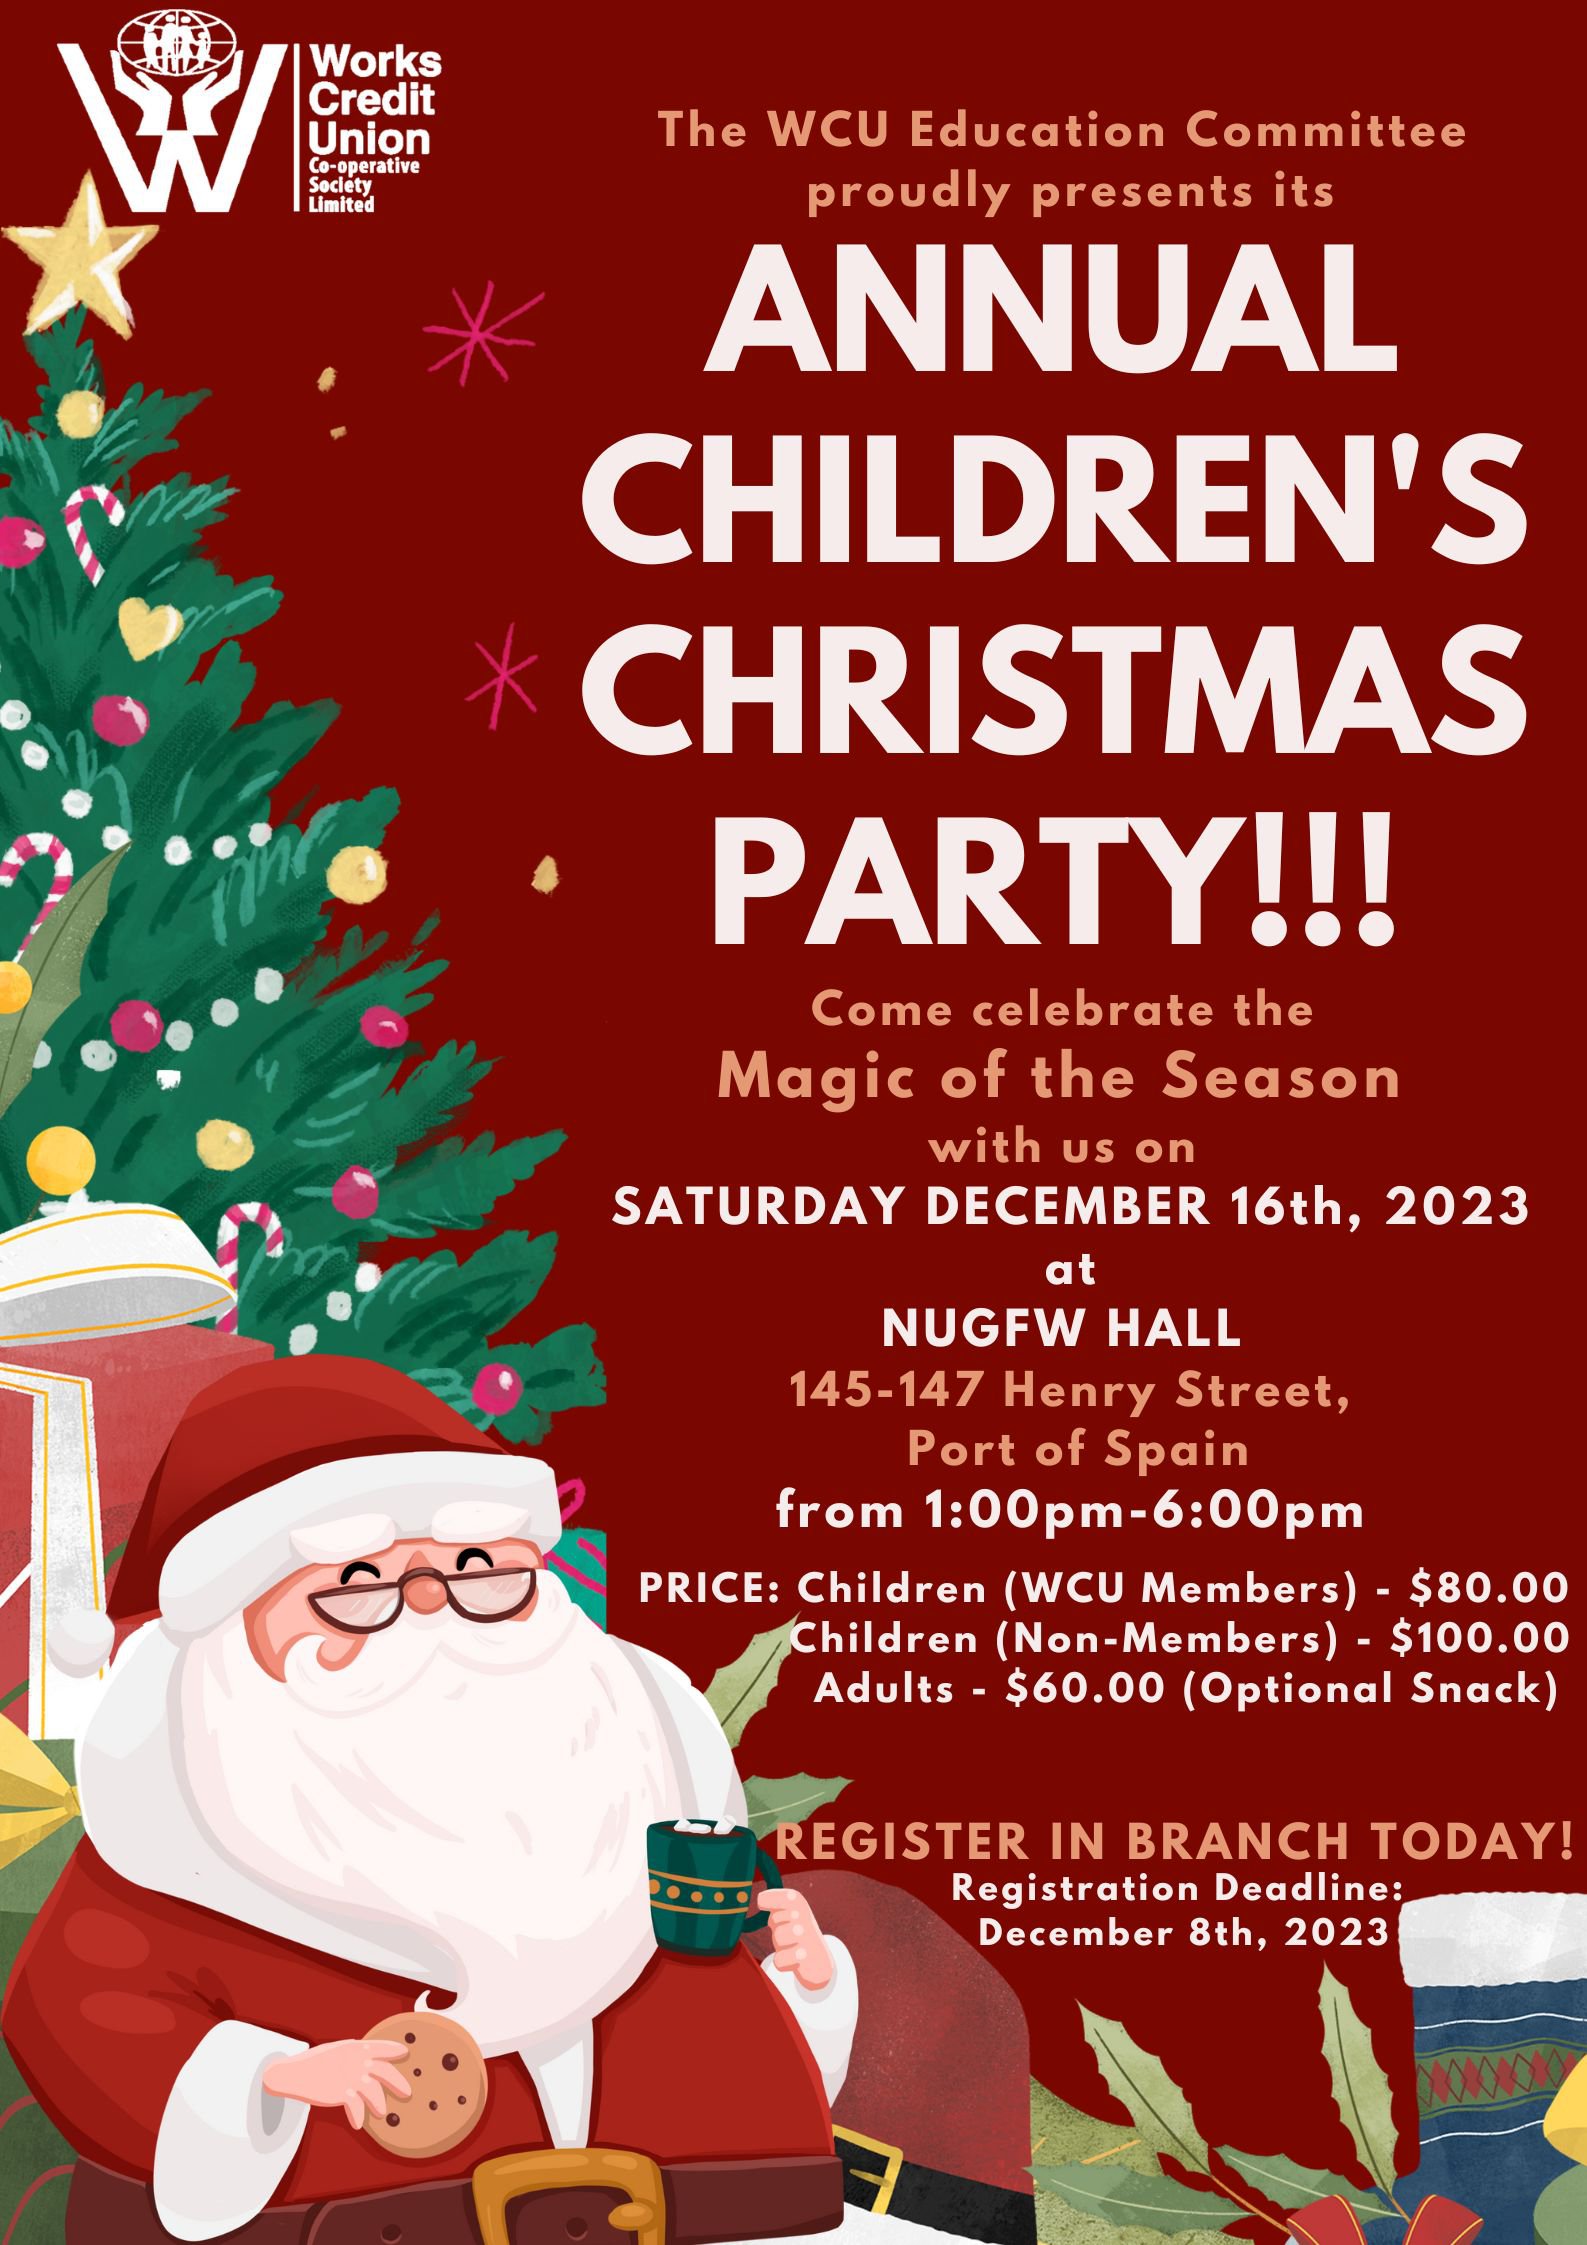 2023 Annual Childrens Christmas Party Flyer.jpg